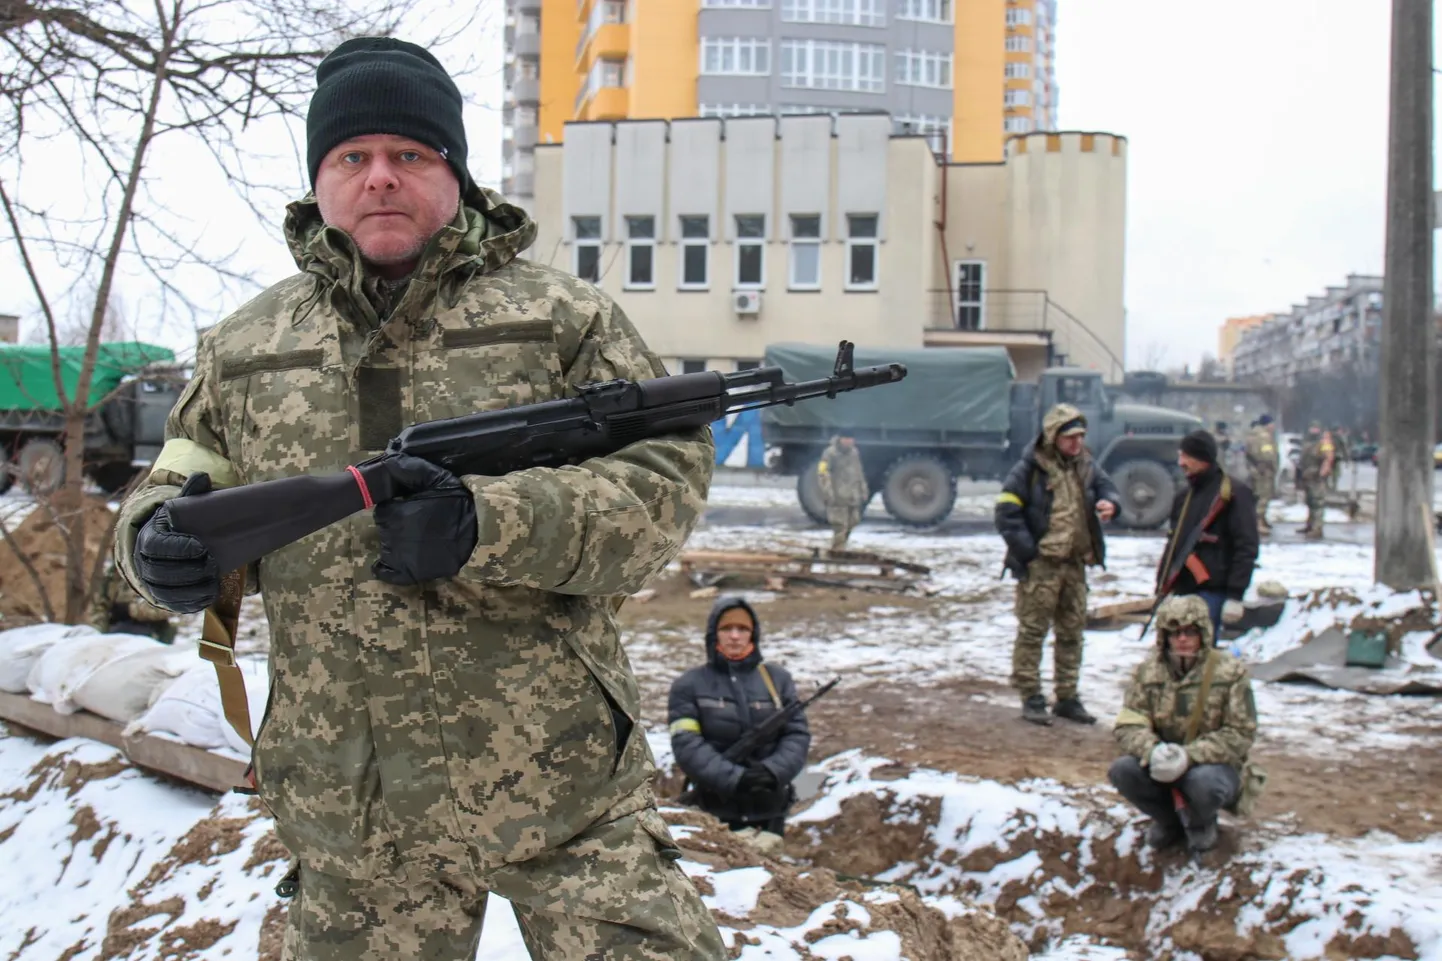 Ukrainian volunteer territorial defense fighters in their positions. The fighter in the foreground comes from the same quarter and has been defending the home since the first day of the war.